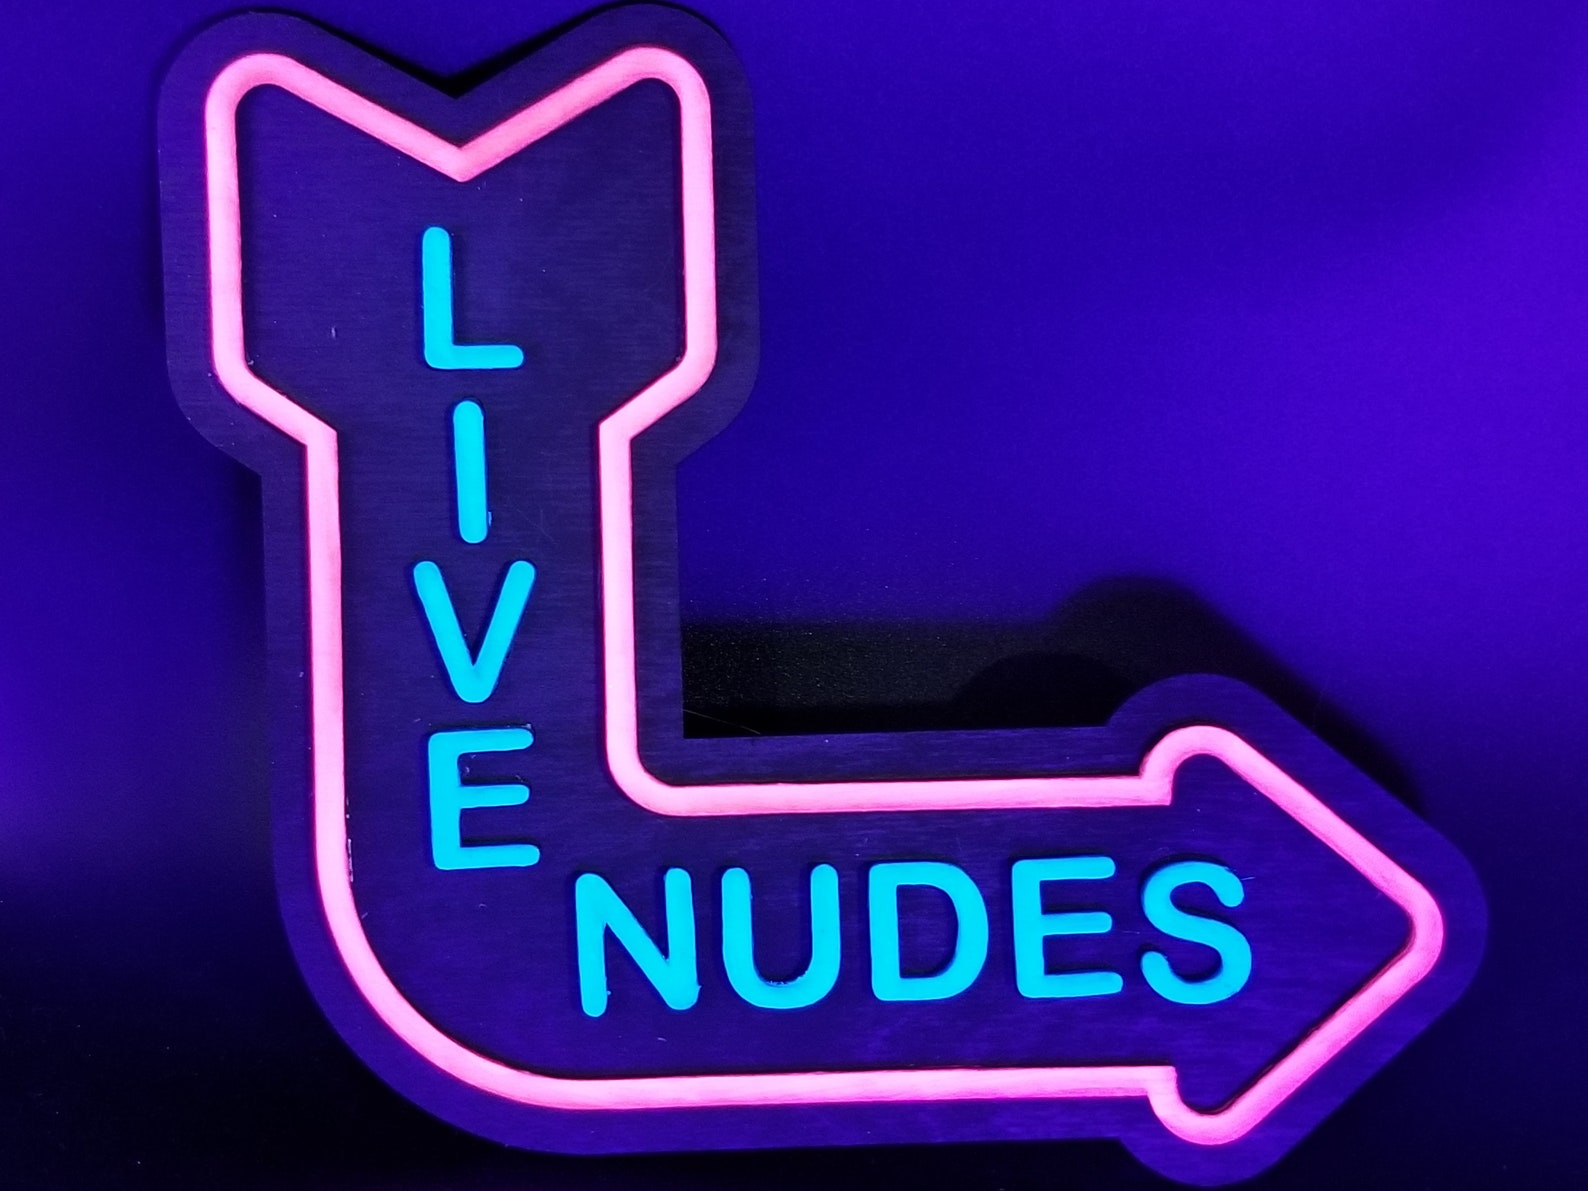 Sex shop XXX and live nude neon style sign. NOT a neon sign - Etsy